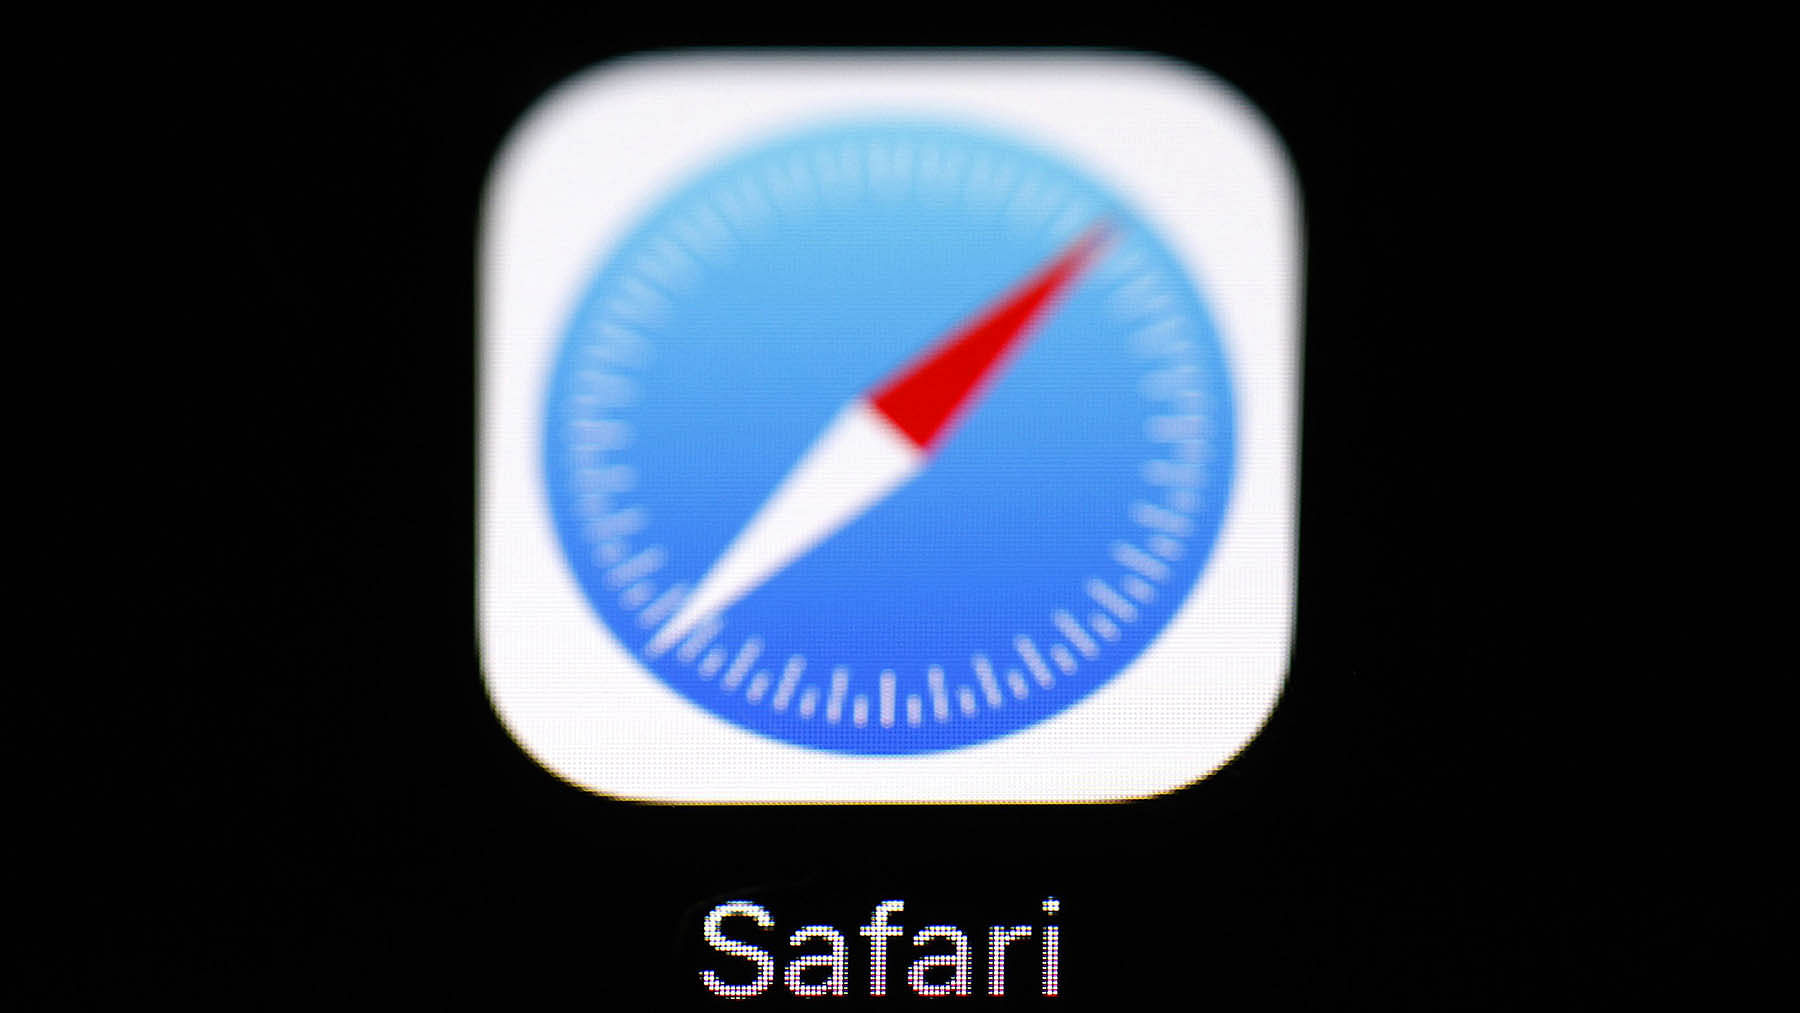 Safari is used by most Apple MacOS users.